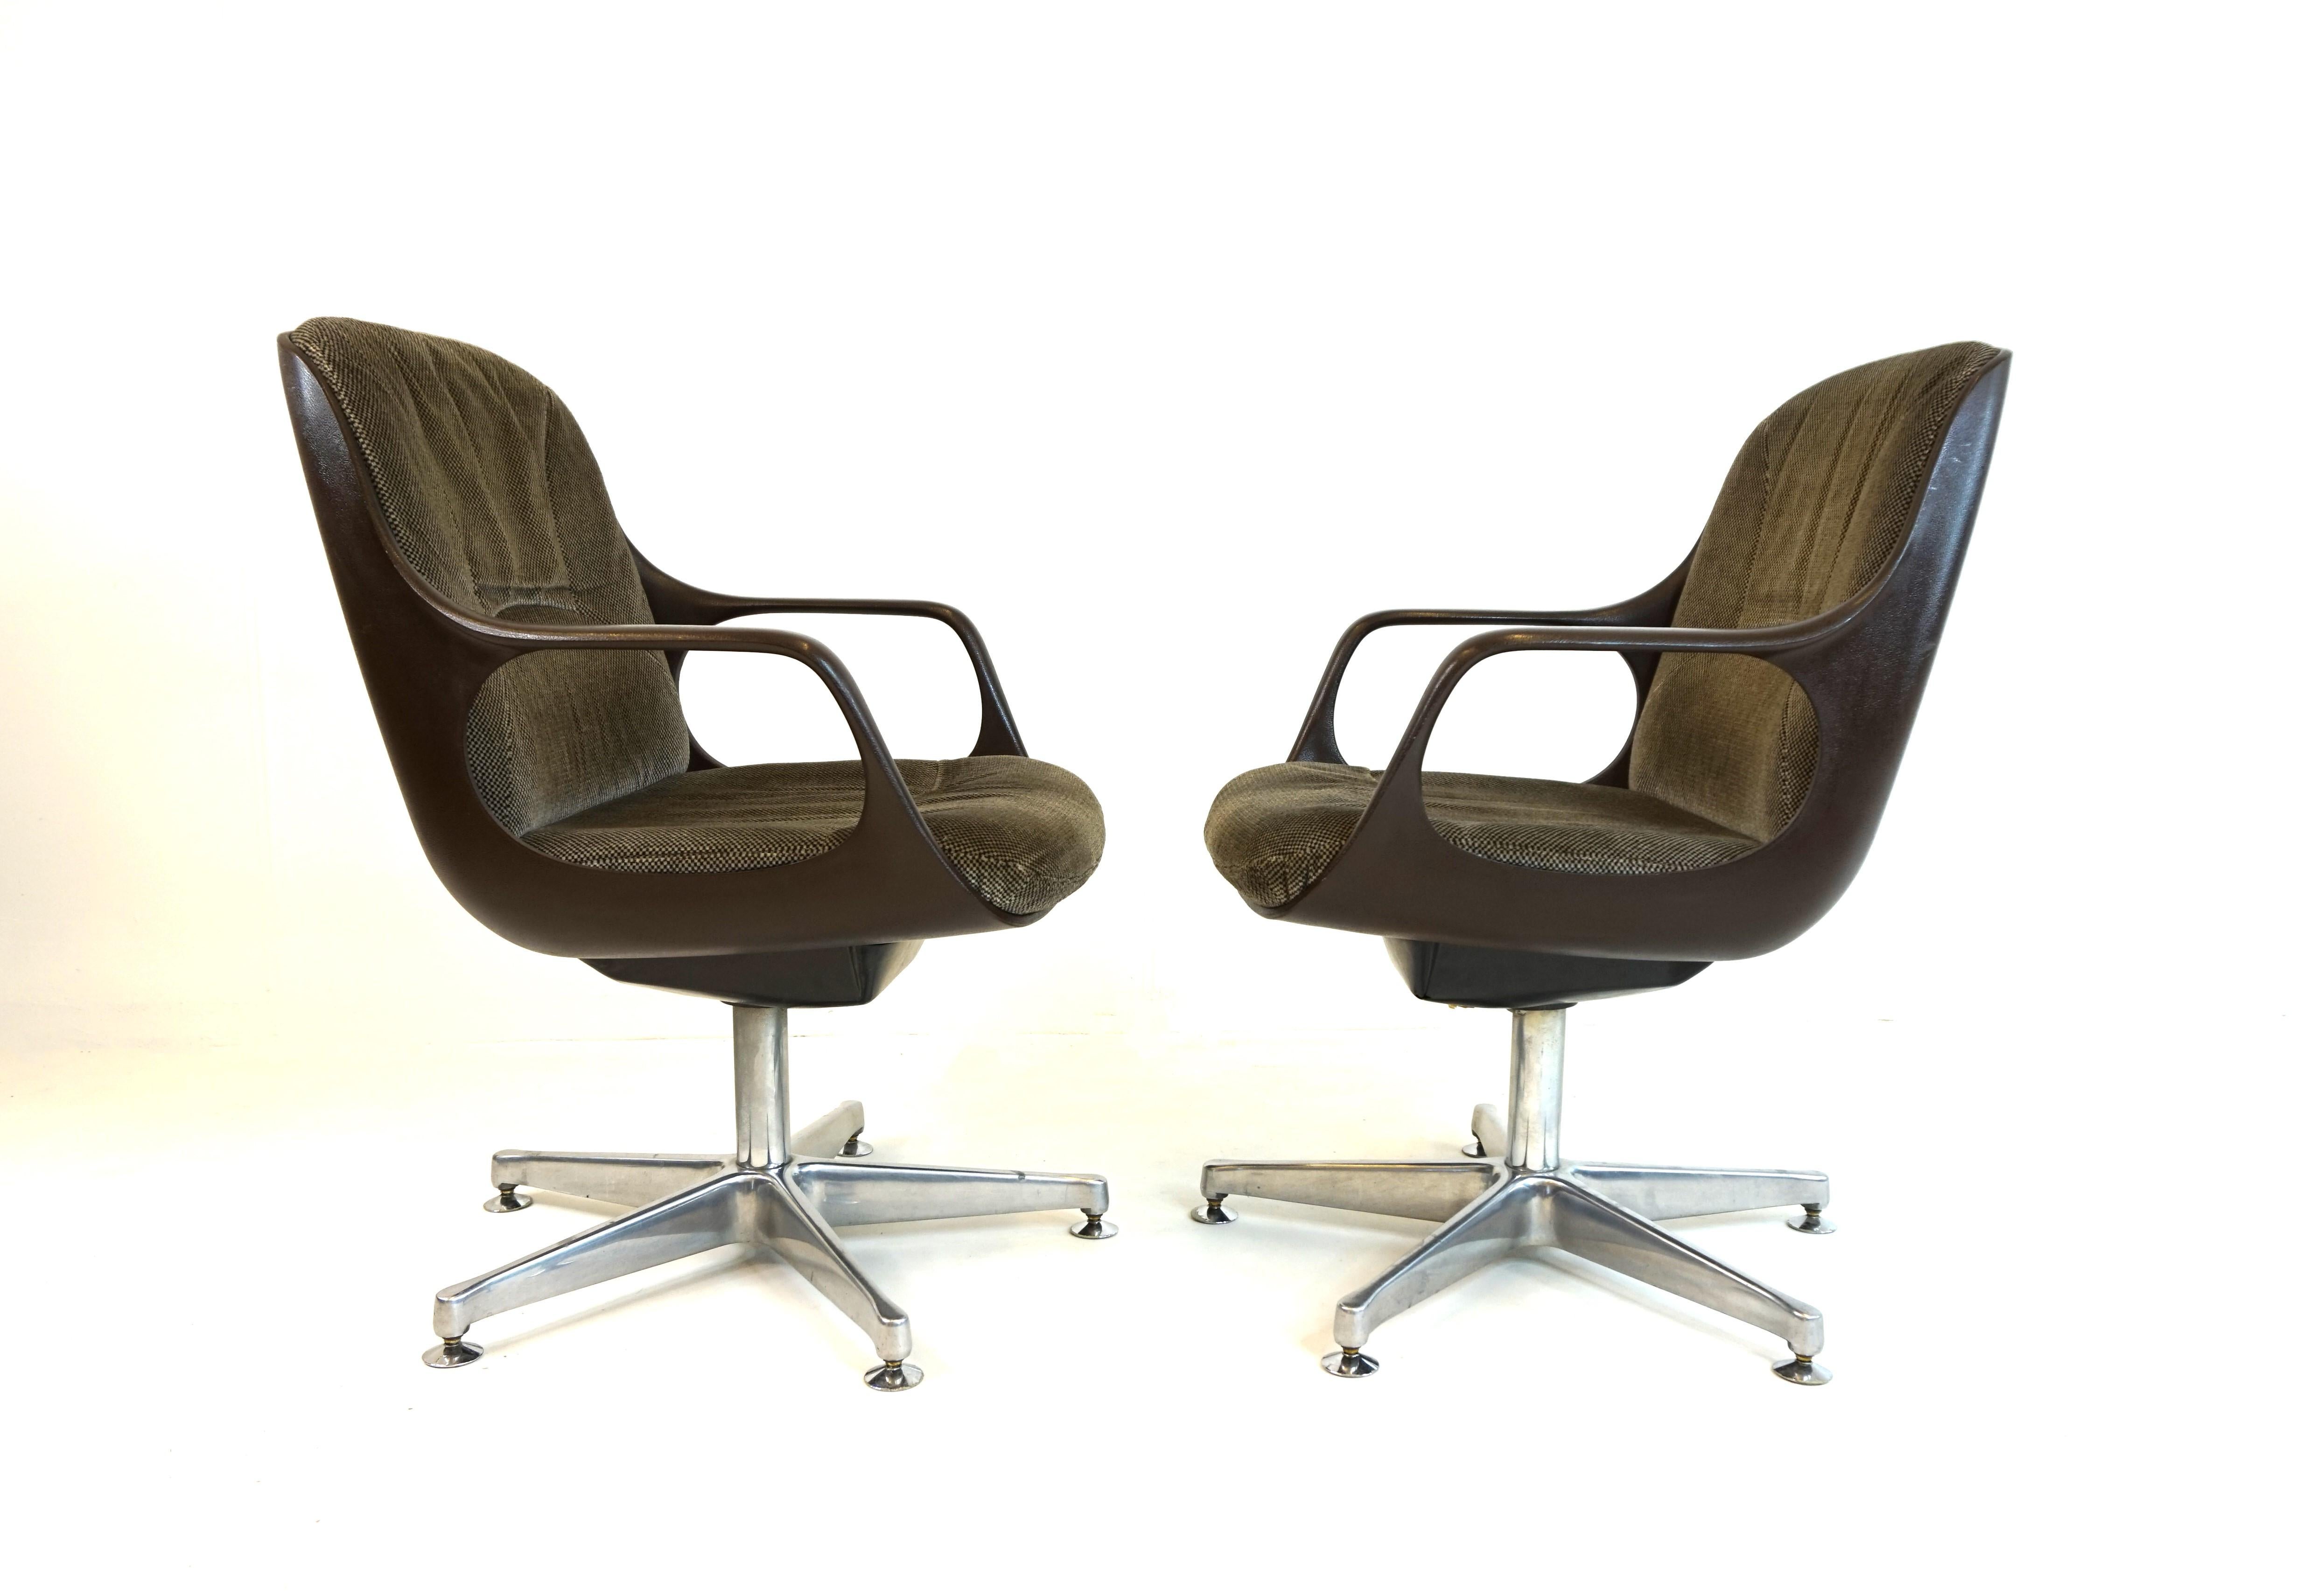 Fabric Chromcraft Set of 2 Space Age Office/Dining Room Chairs